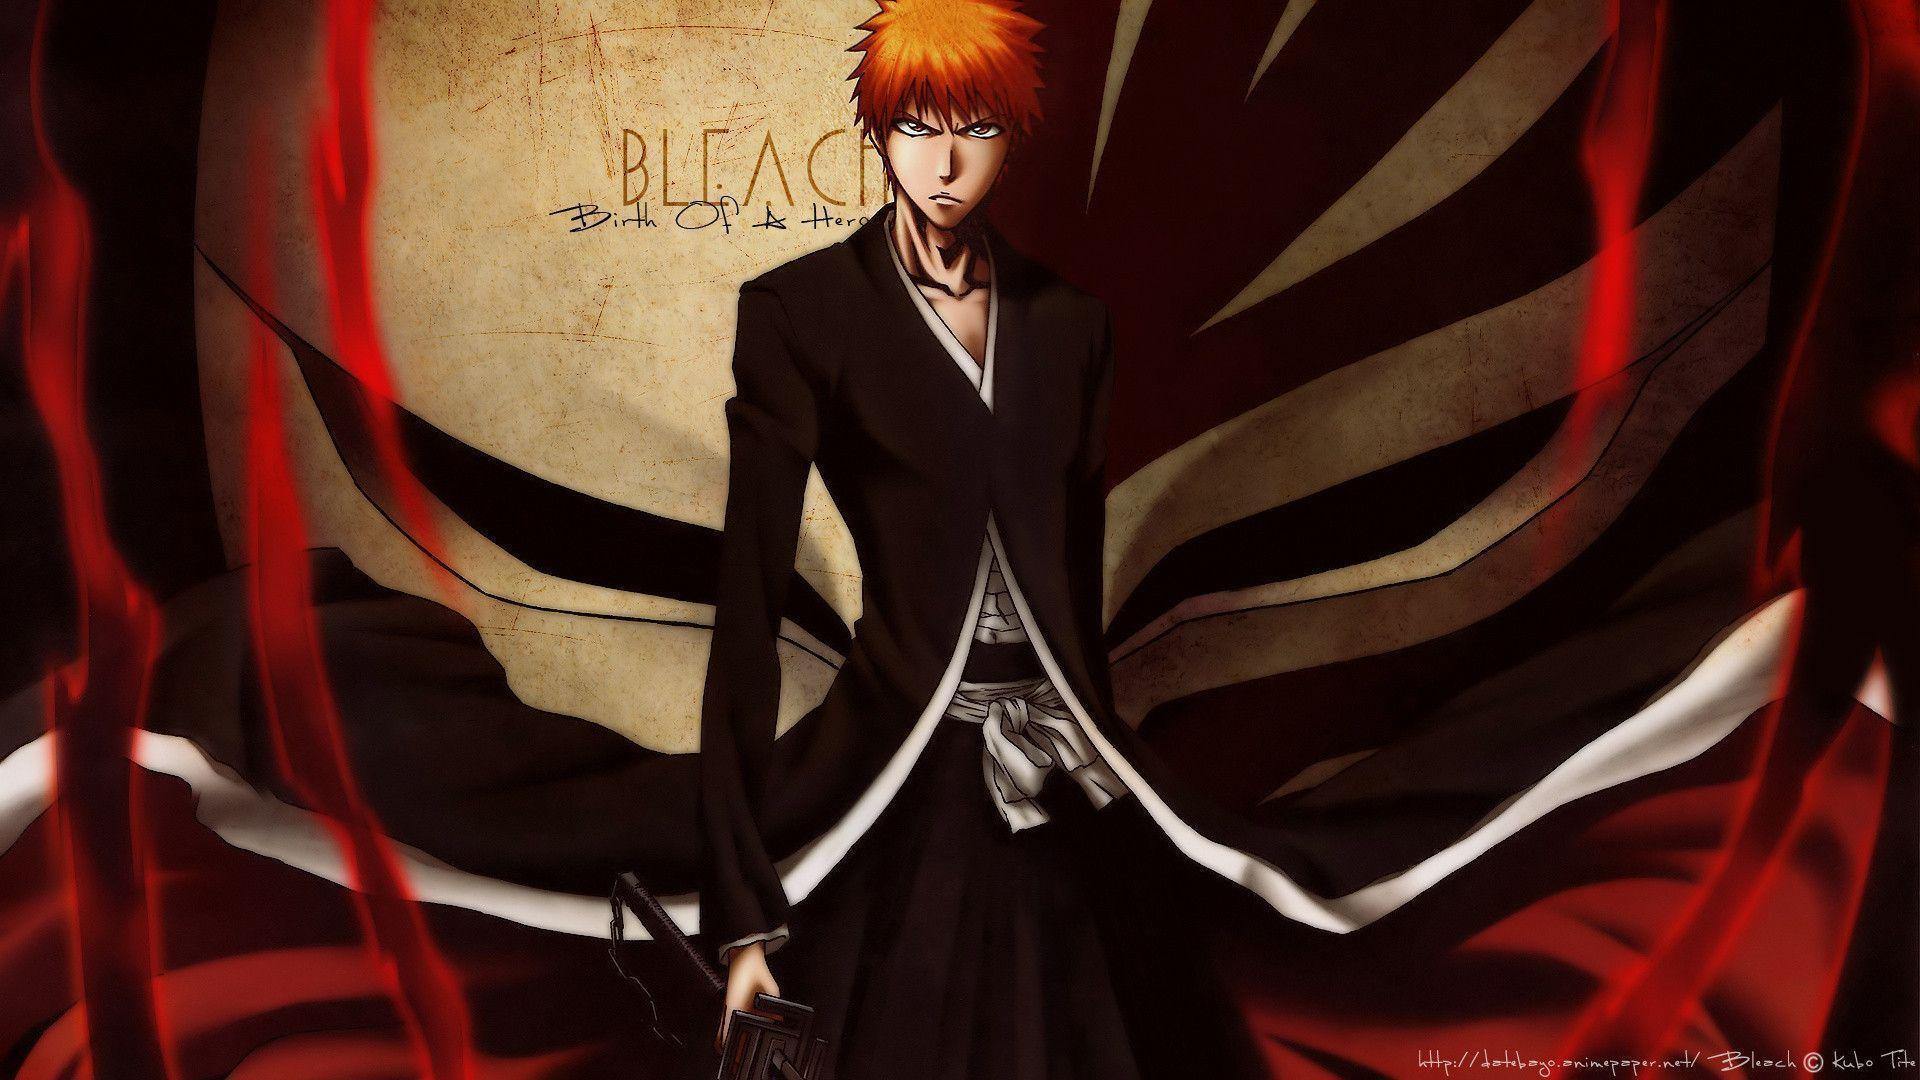 Wallpapers For > Bleach Wallpapers Hd 1920x1080